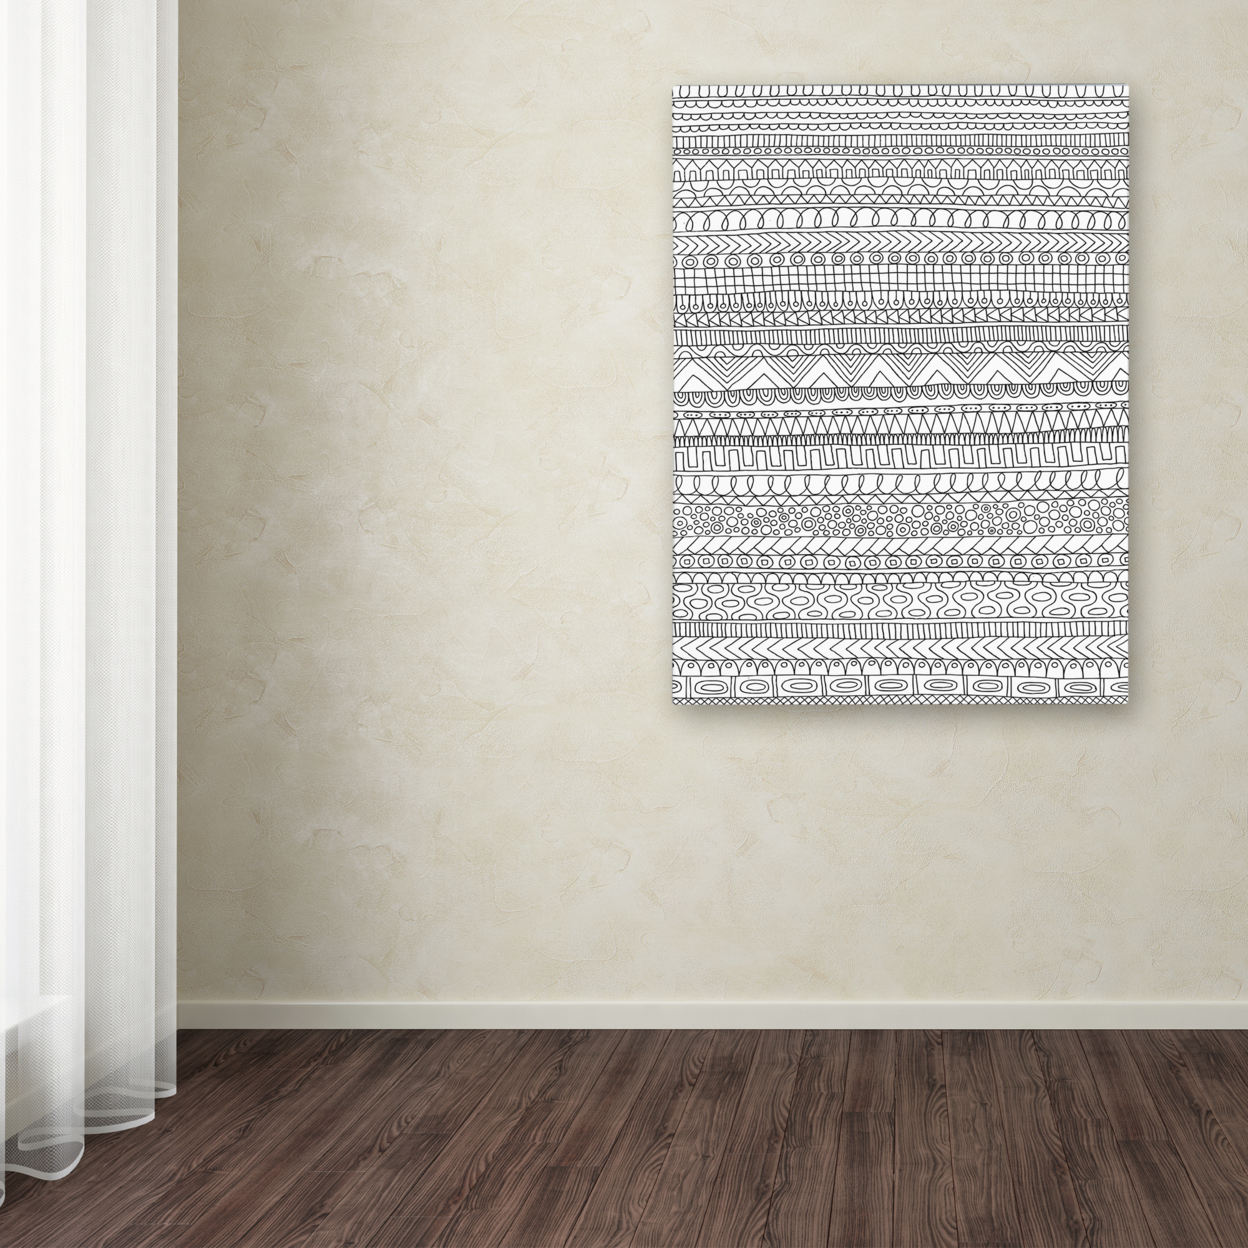 Hello Angel 'Jersey Knit' Canvas Wall Art 35 X 47 Inches